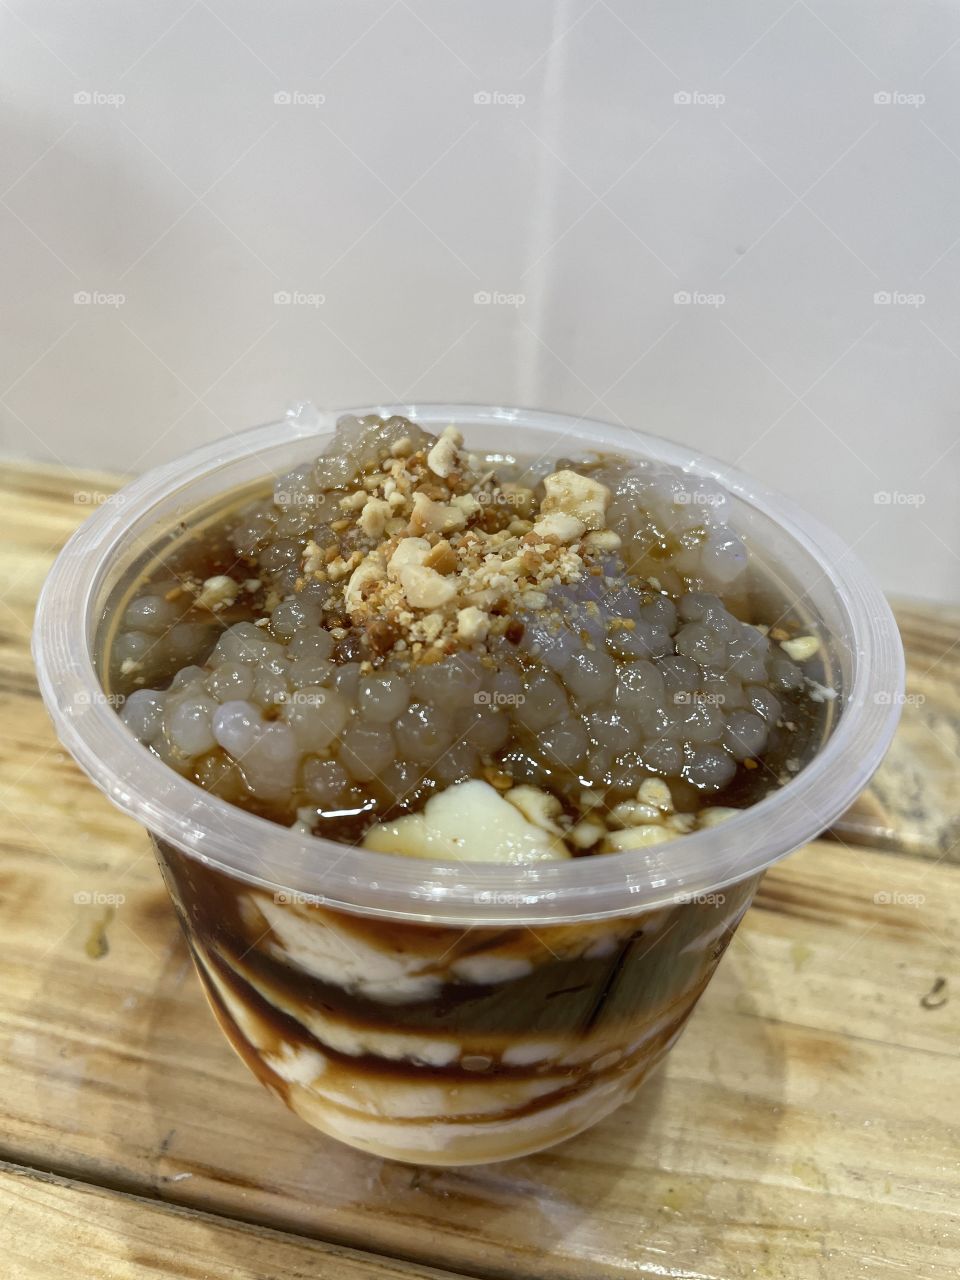 Taho is a Philippine local food made of silken tofu.